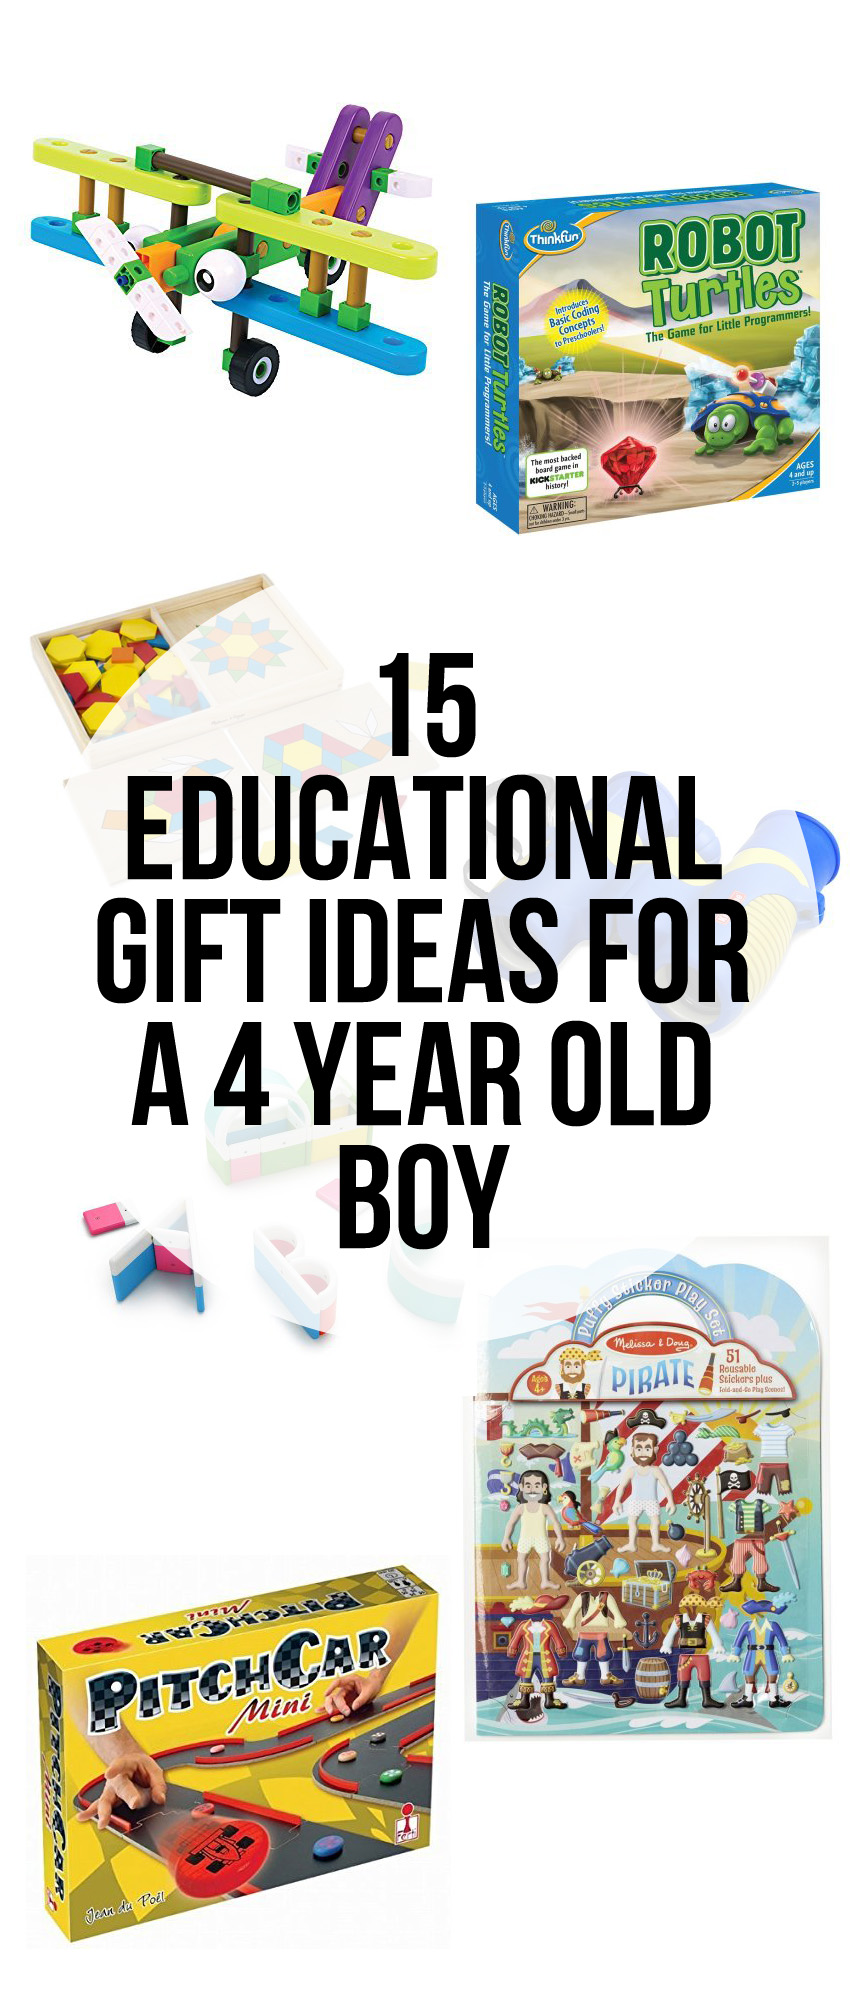 Gift Guide - 15 Educational Gift Ideas for a 4 Year Old Boy